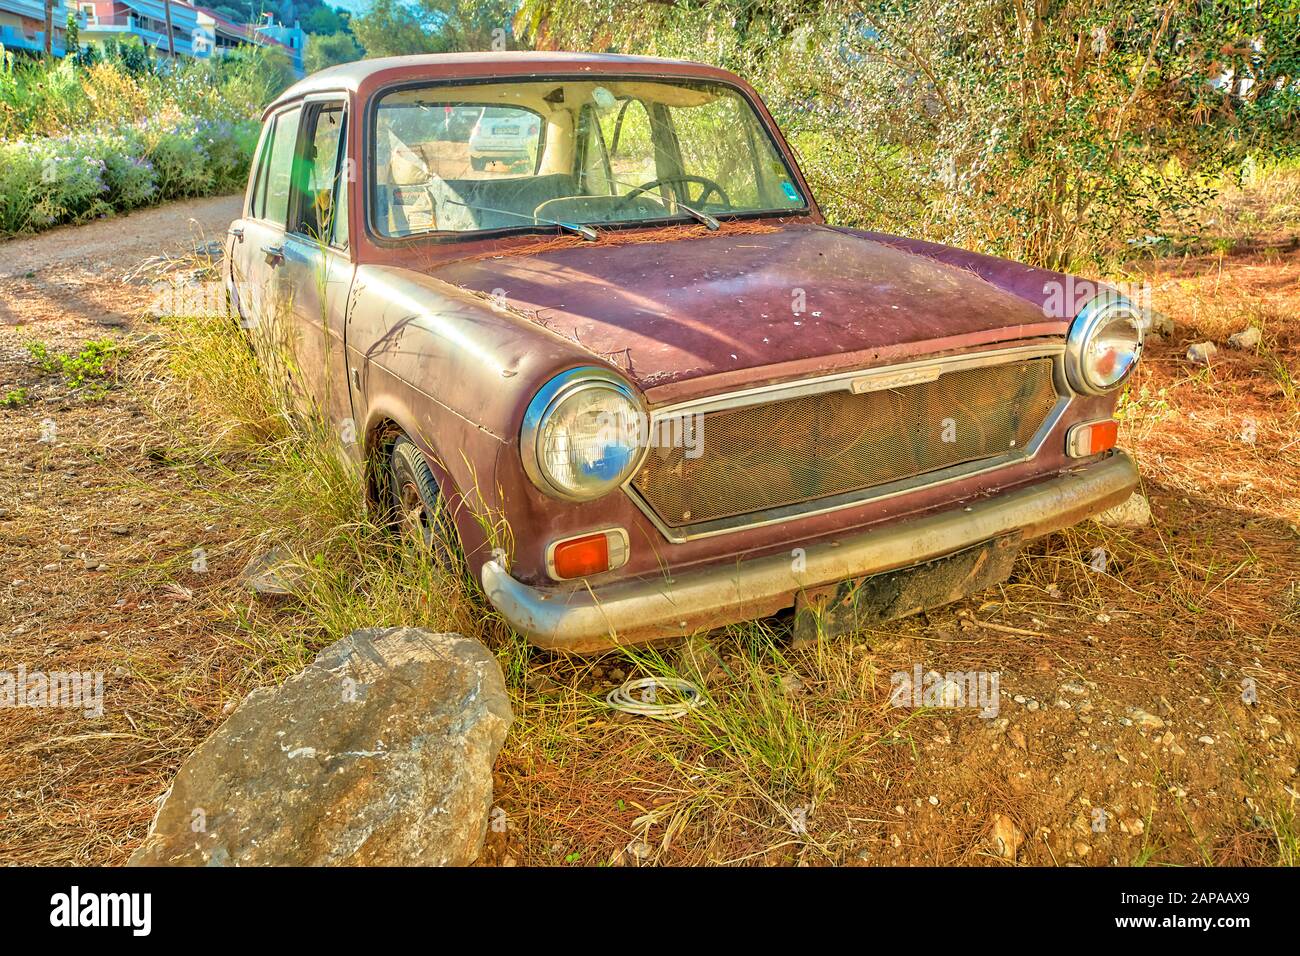 Nafplio, Peloponnese, Greece - August 29, 2015: rusty wreck of car Austin 1300 MkIII. Made by the historical Austin Motor Company Limited, British Stock Photo